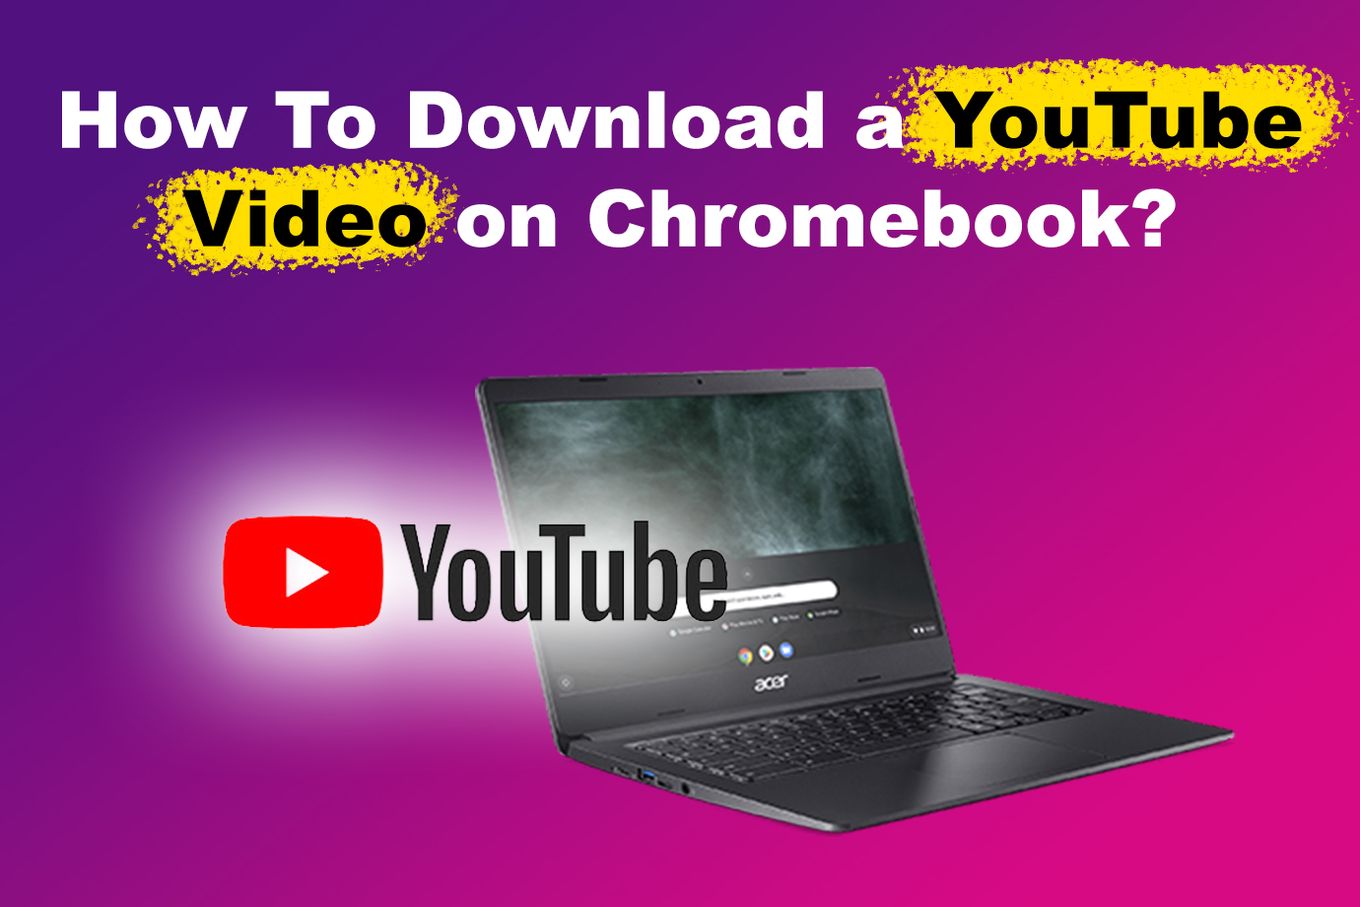 How To Download a YouTube Video on Chromebook